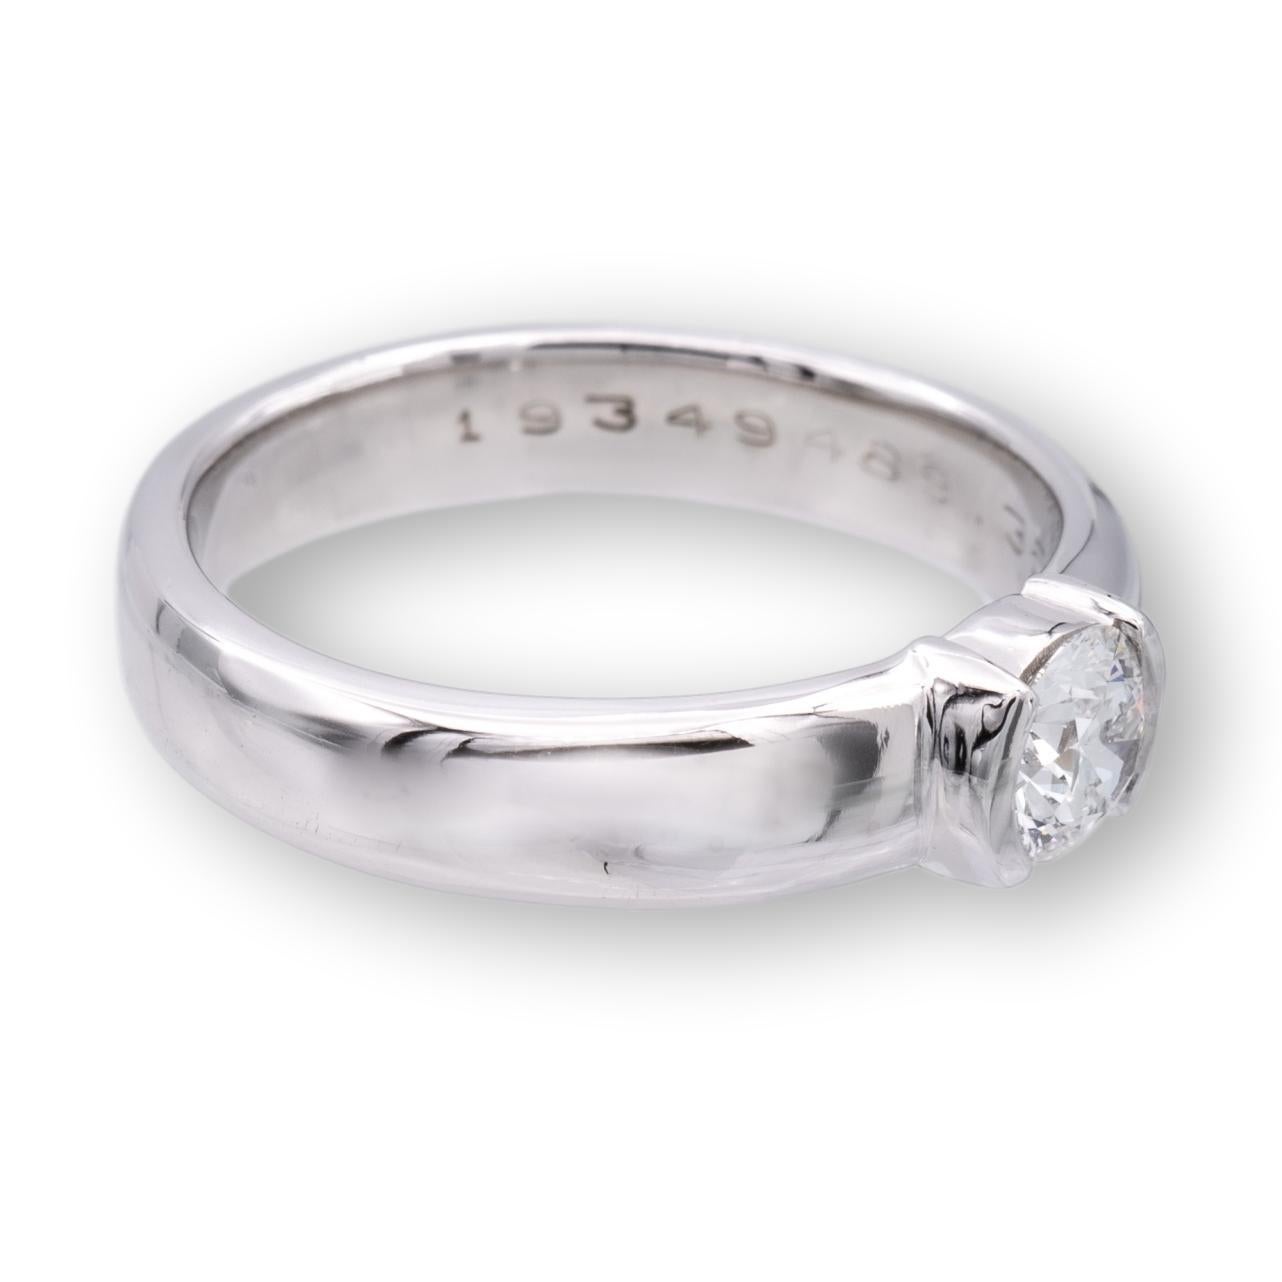 Tiffany and Co. engagement ring from the Etoile collection finely crafted in platinum featuring a round brilliant cut diamond center weighing 0.35 cts. F color , VVS2 clarity set in a half bezel setting. The original Tiffany certificate for this